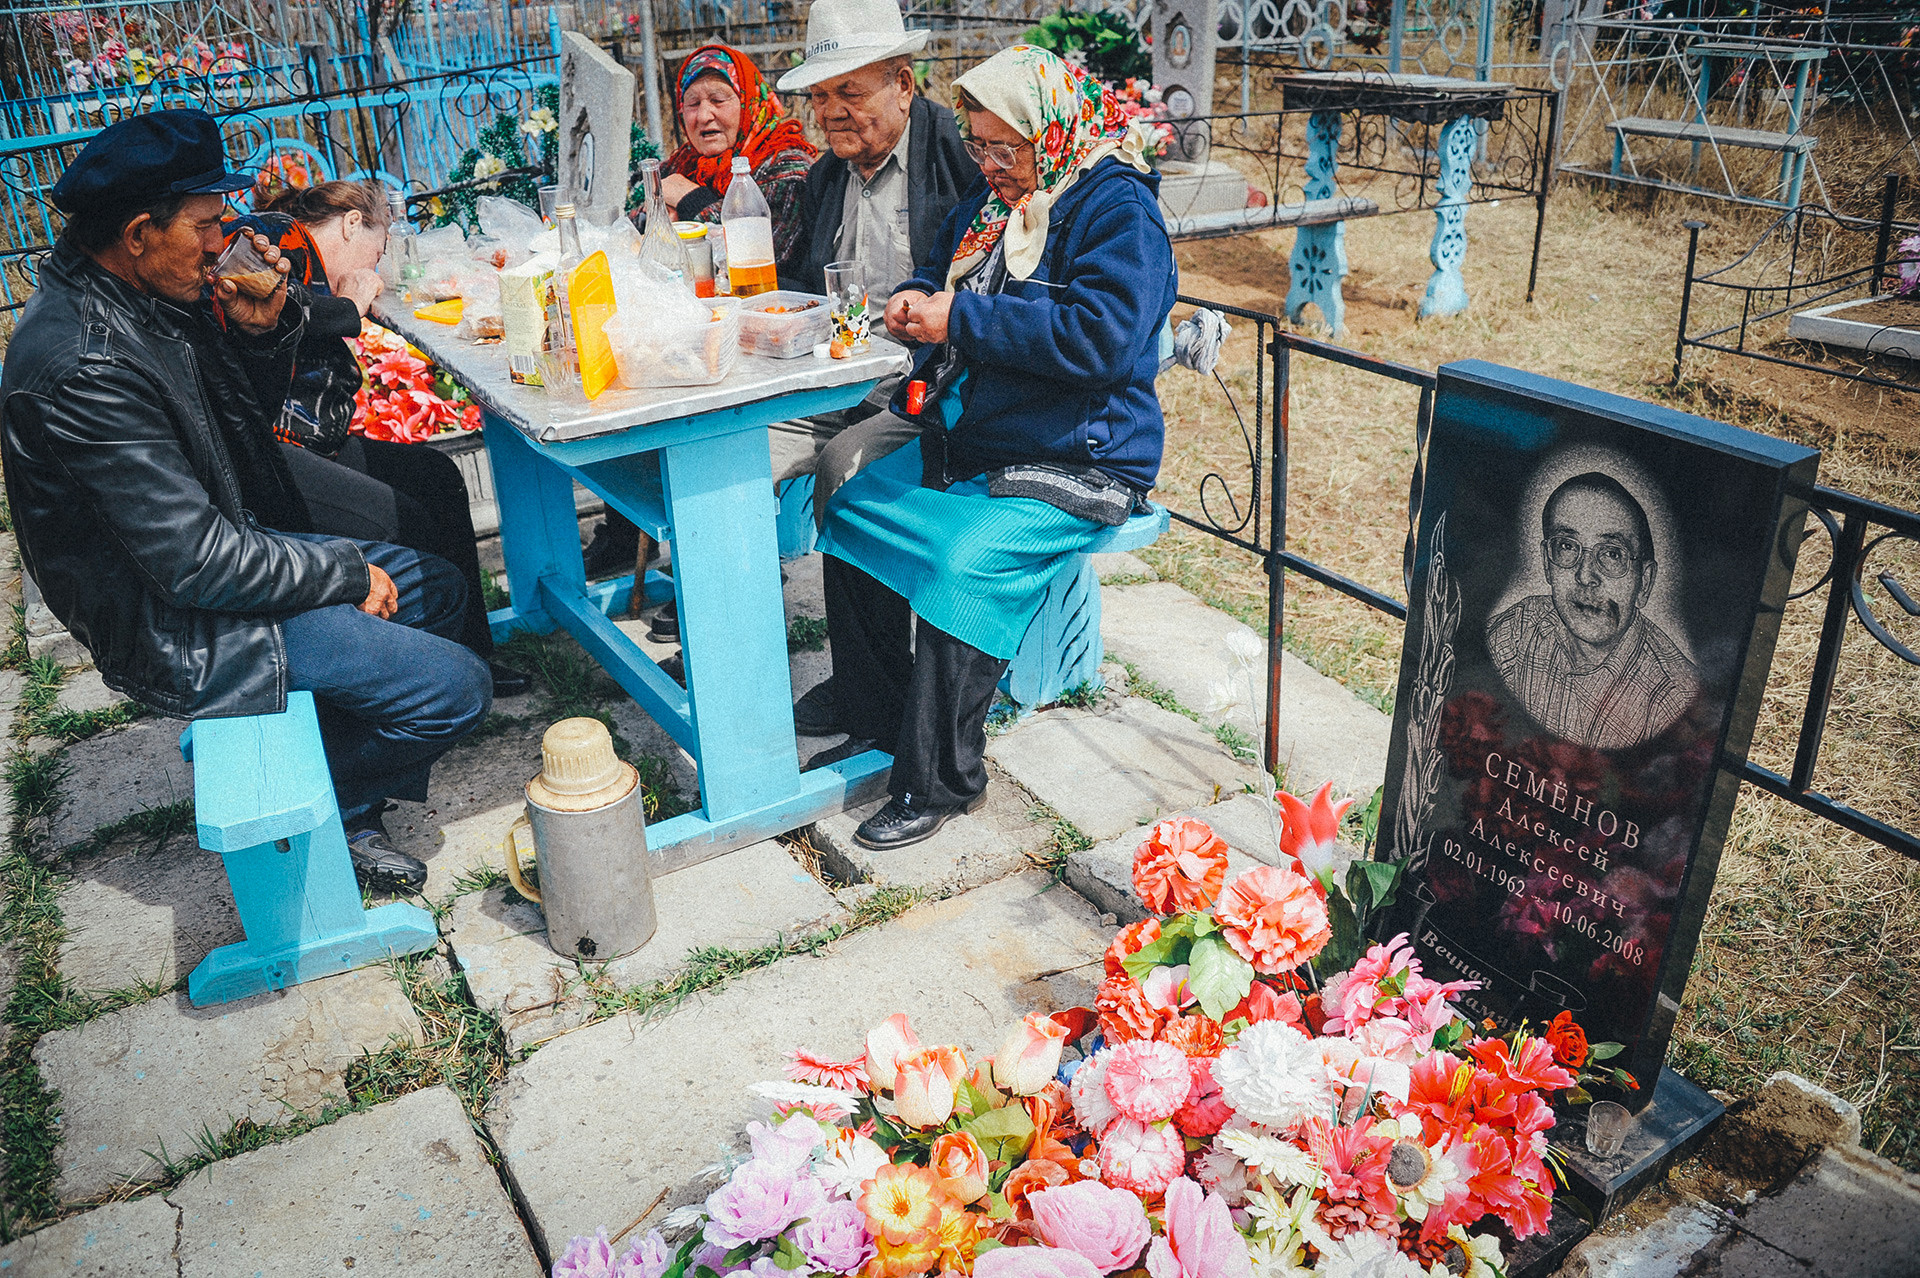 Russians having a commemorative meal at the grave of their relative